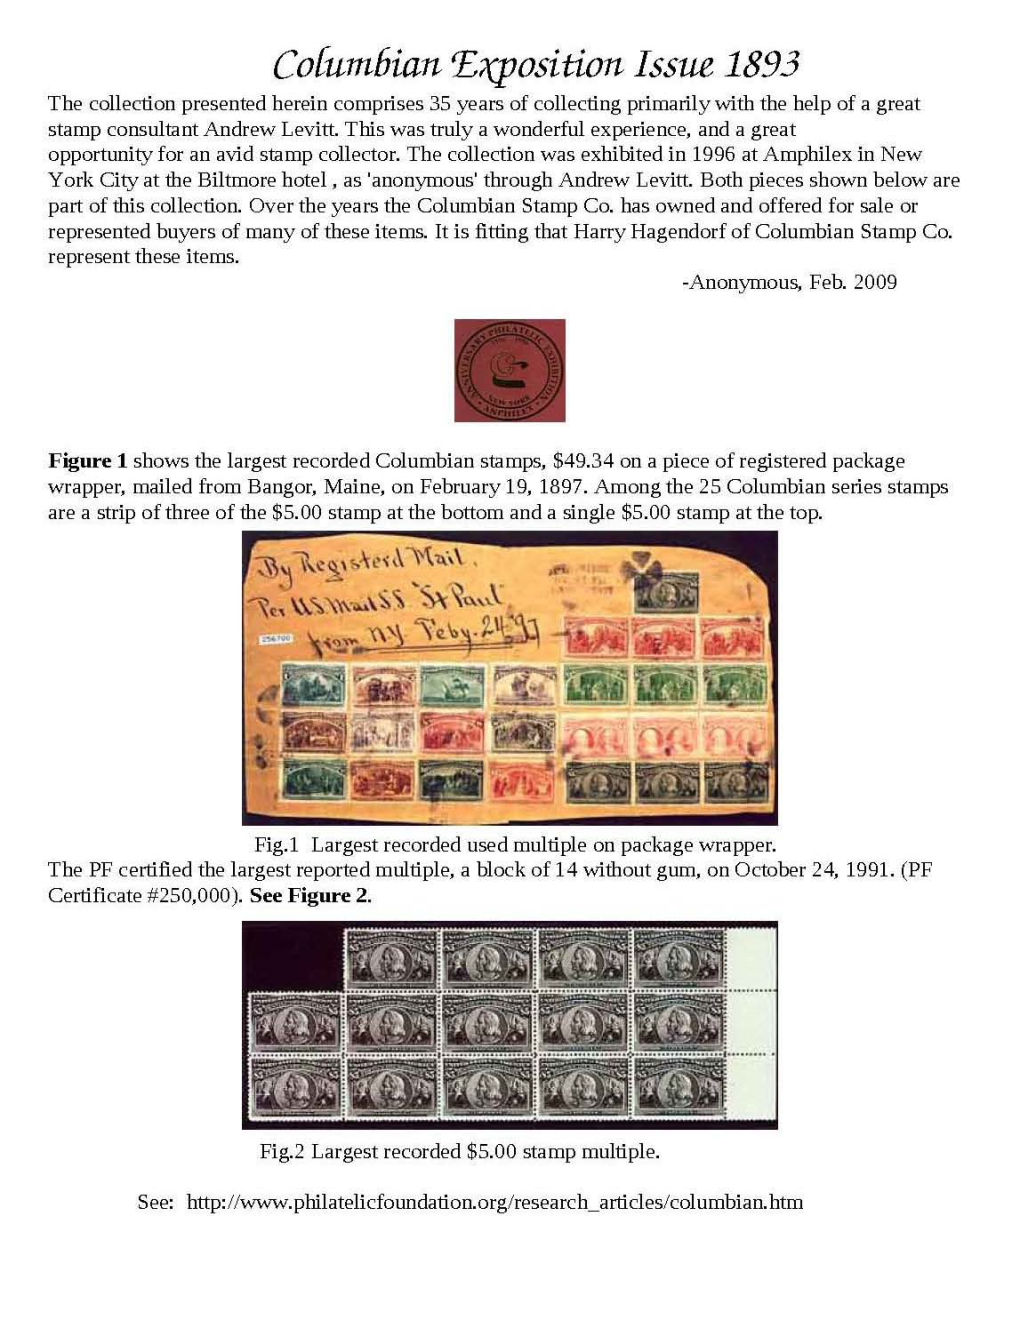 Co[Umbian 'Ef(Jjosition Issue 1893 the Collection Presented Herein Comprises 35 Years of Collecting Primarily with the Help of a Great Stamp Consultant Andrew Levitt